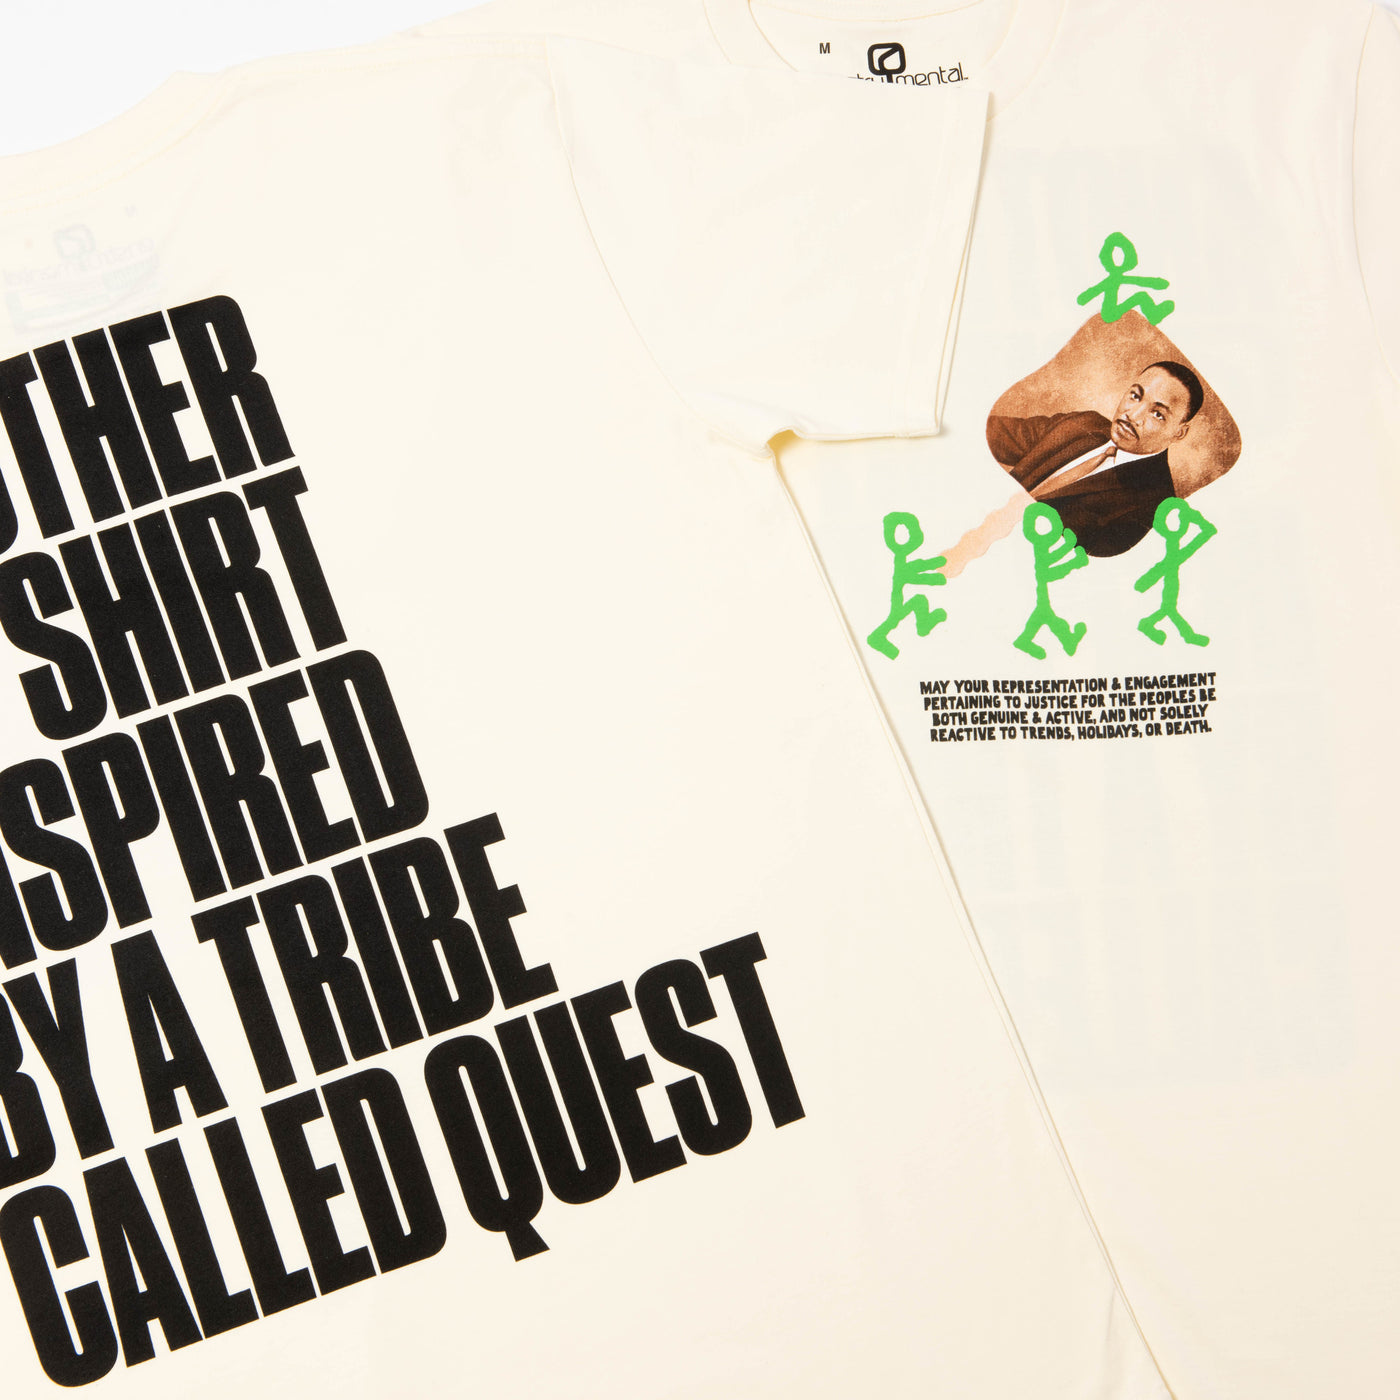 ANOTHER SHIRT INSPIRED BY A TRIBE CALLED QUEST